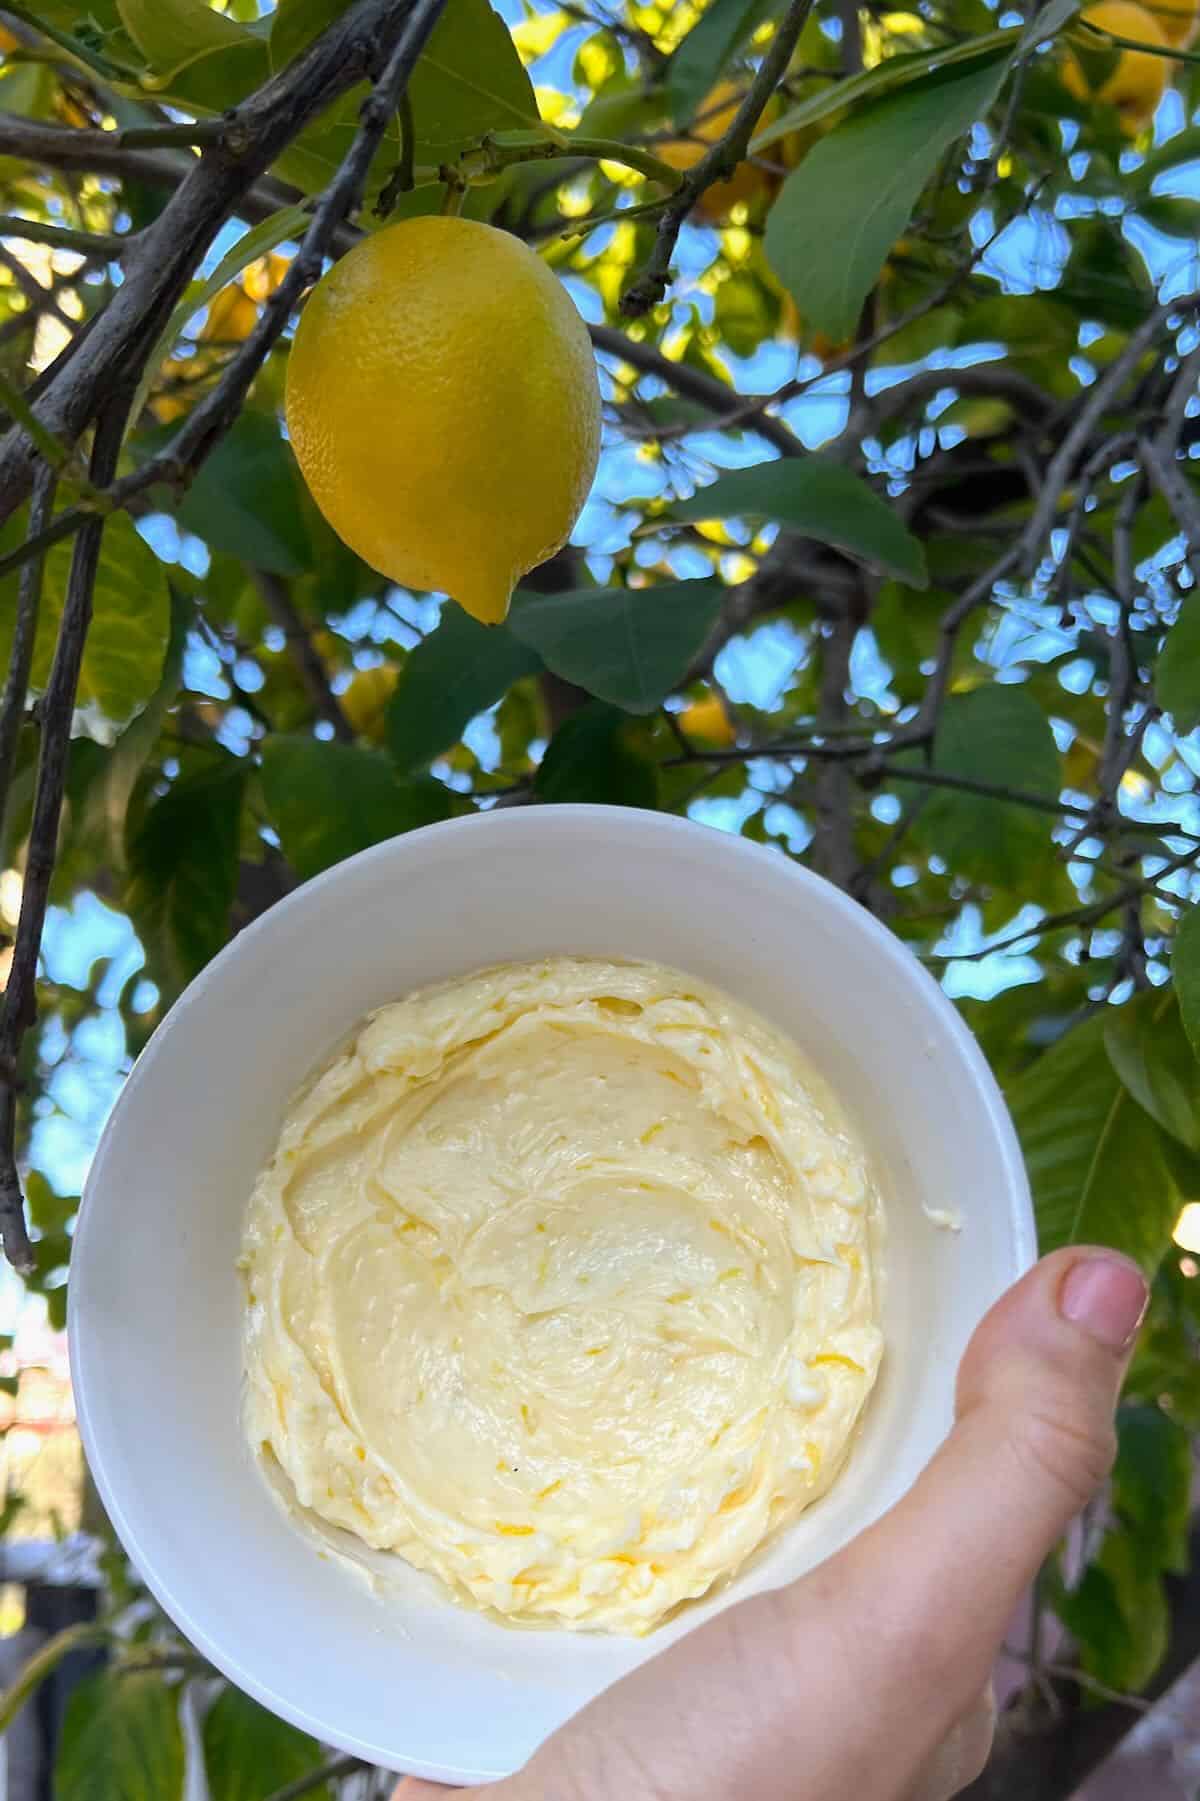 A lemon and a bowl with lemon butter